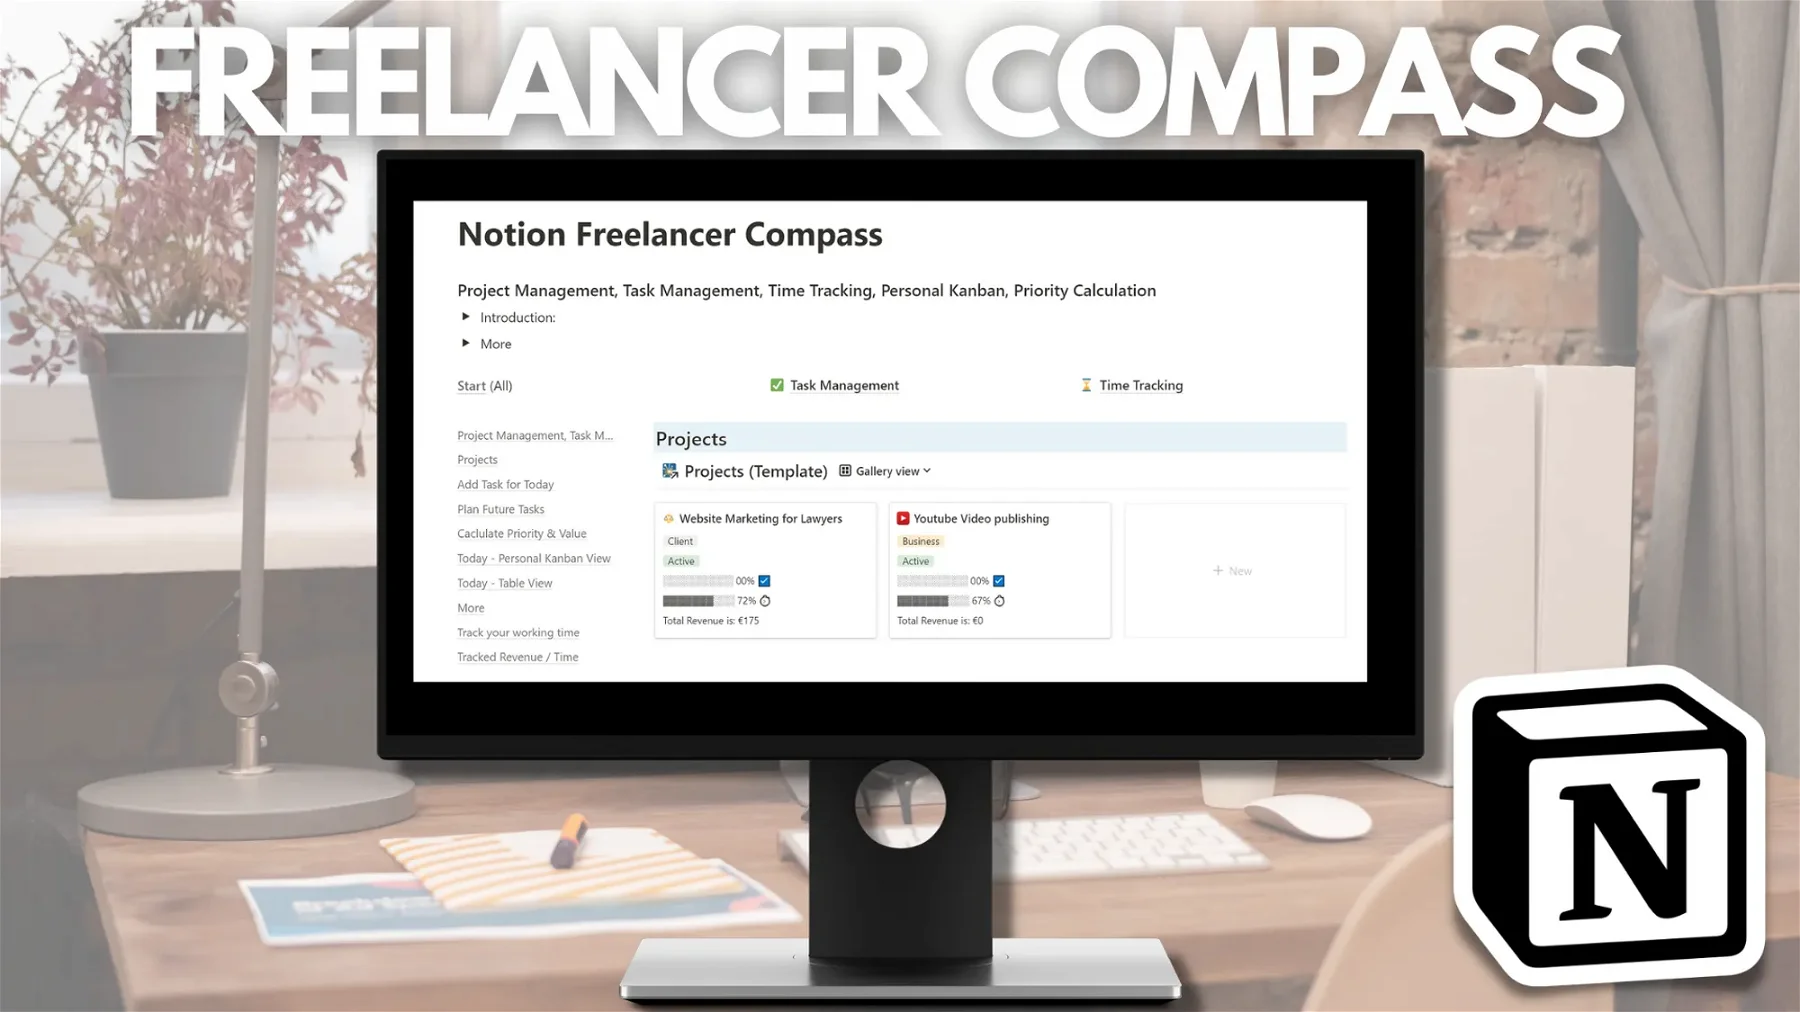 FREELANCER OS COMPASS - Project Management Template for Notion